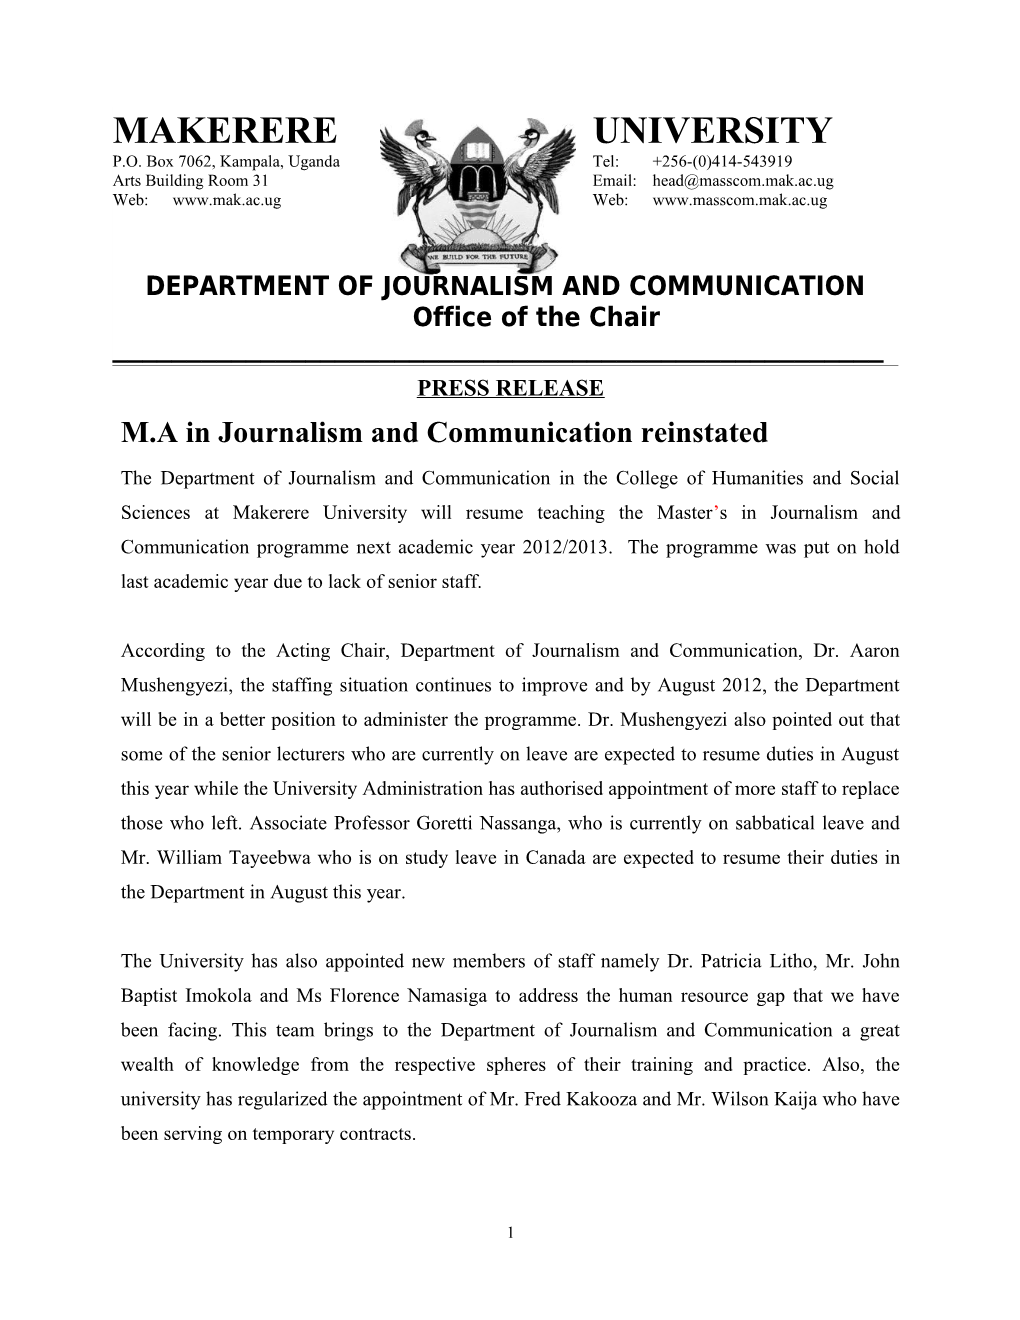 M.A in Journalism and Communication Reinstated